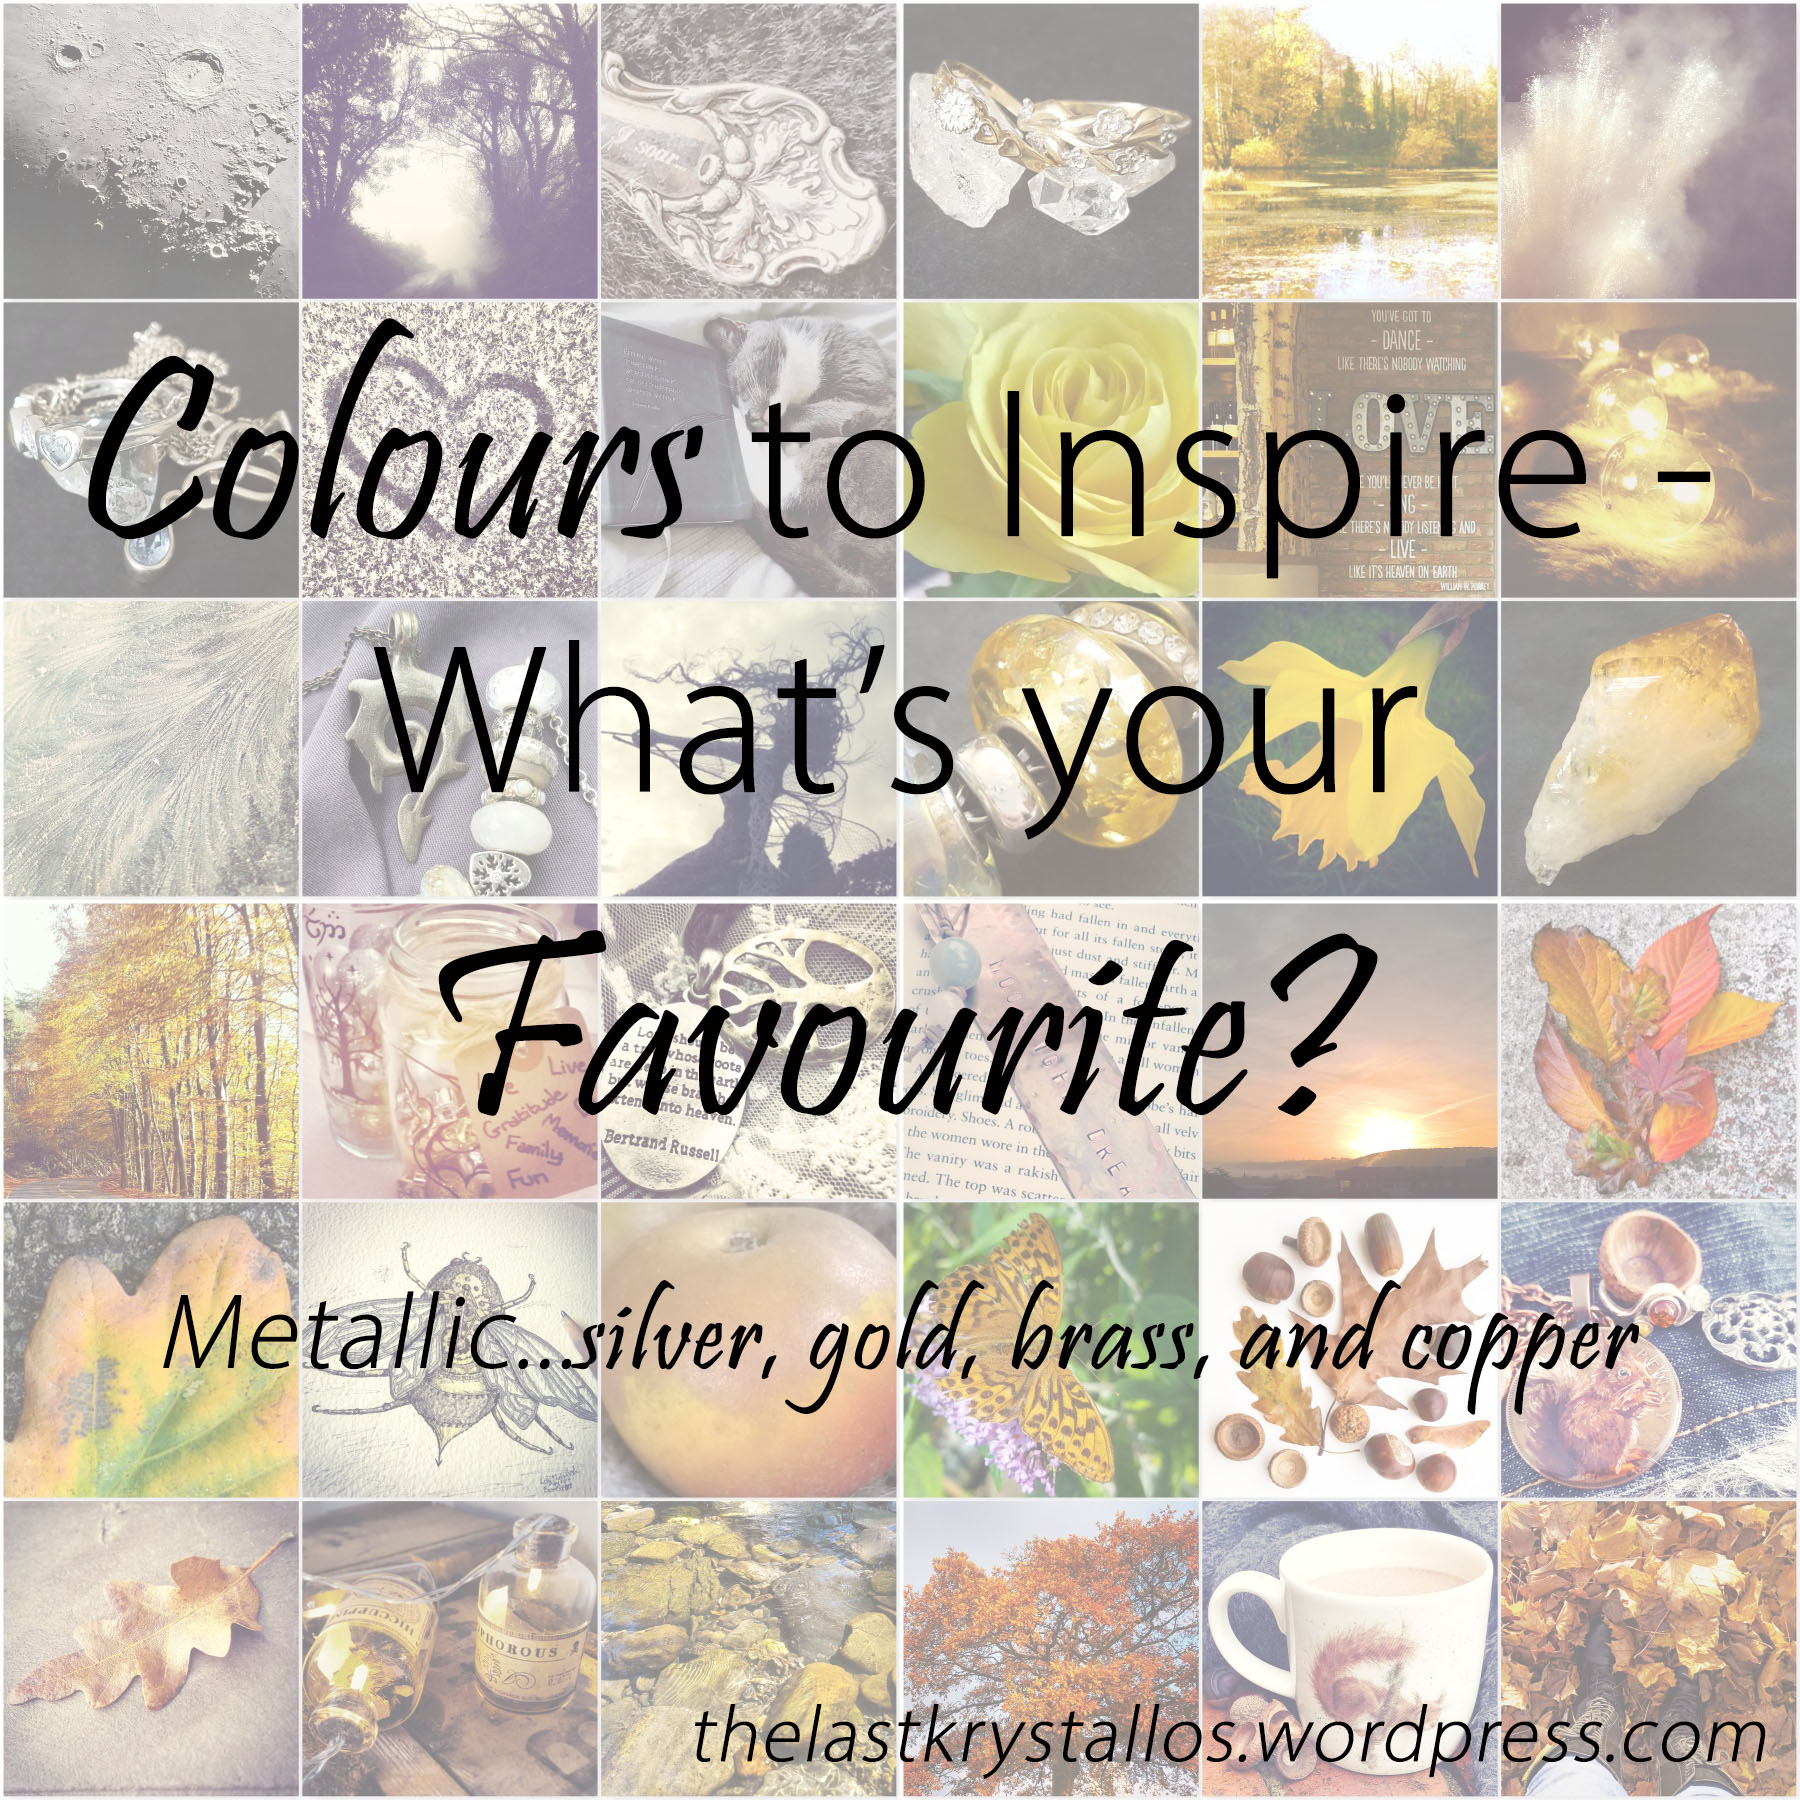 Collage of photos depicting silver, gold, brass and copper photos for Colours to Inspire - Metallics, for The Last Krystallos blog